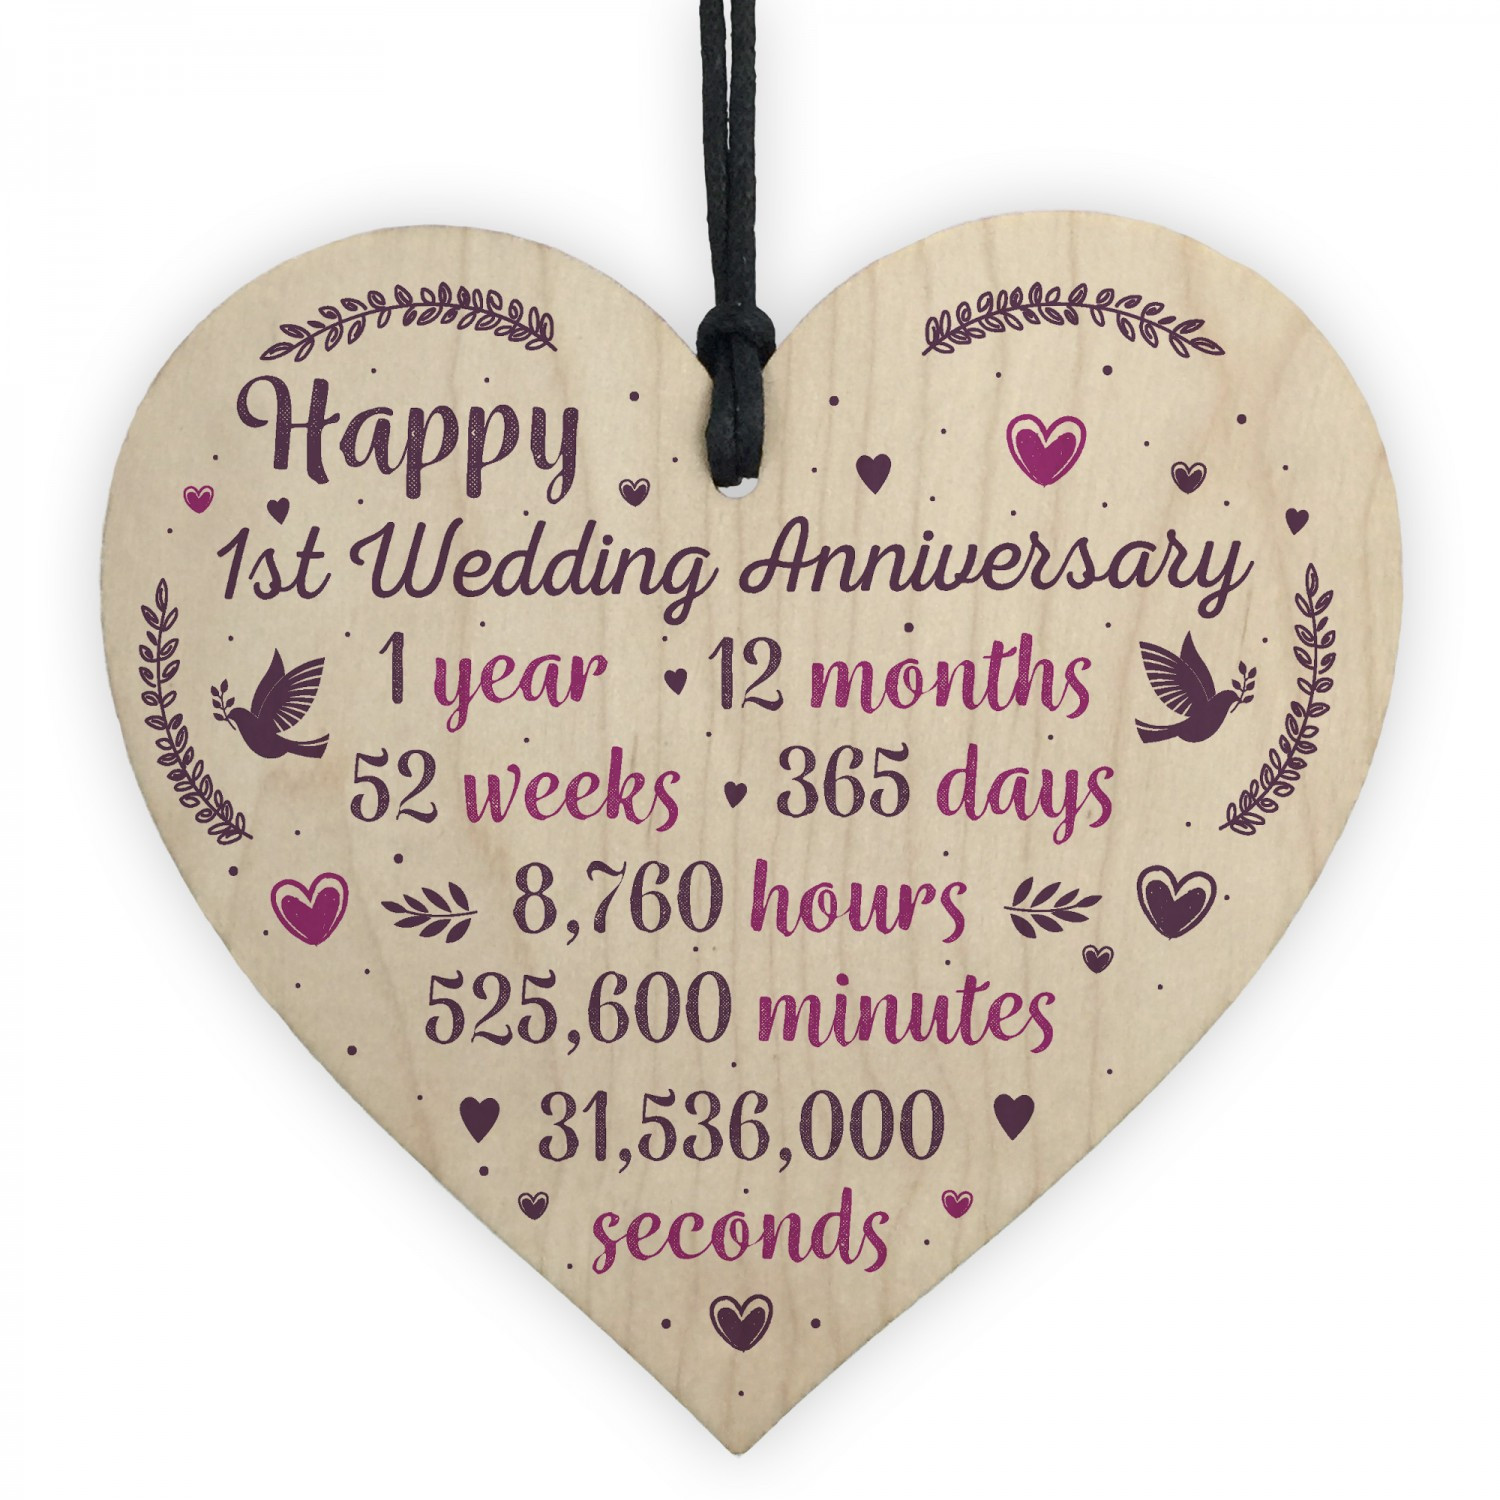 1st Wedding Anniversary Gift Ideas For Her
 Handmade Wood Heart Plaque 1st Wedding Anniversary Gift